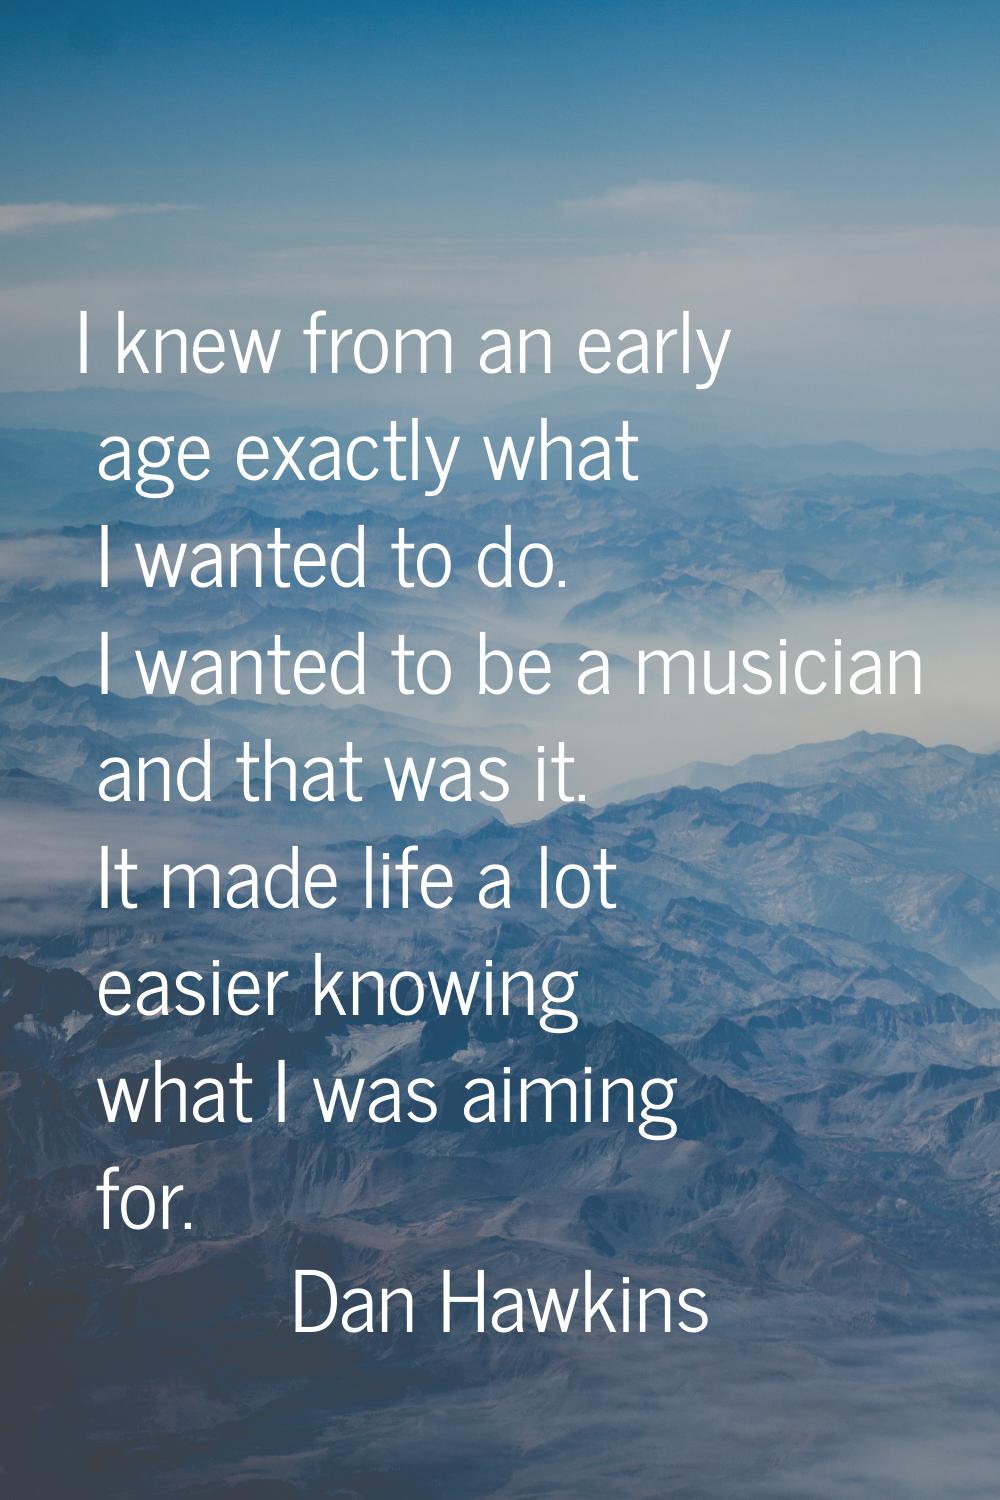 I knew from an early age exactly what I wanted to do. I wanted to be a musician and that was it. It